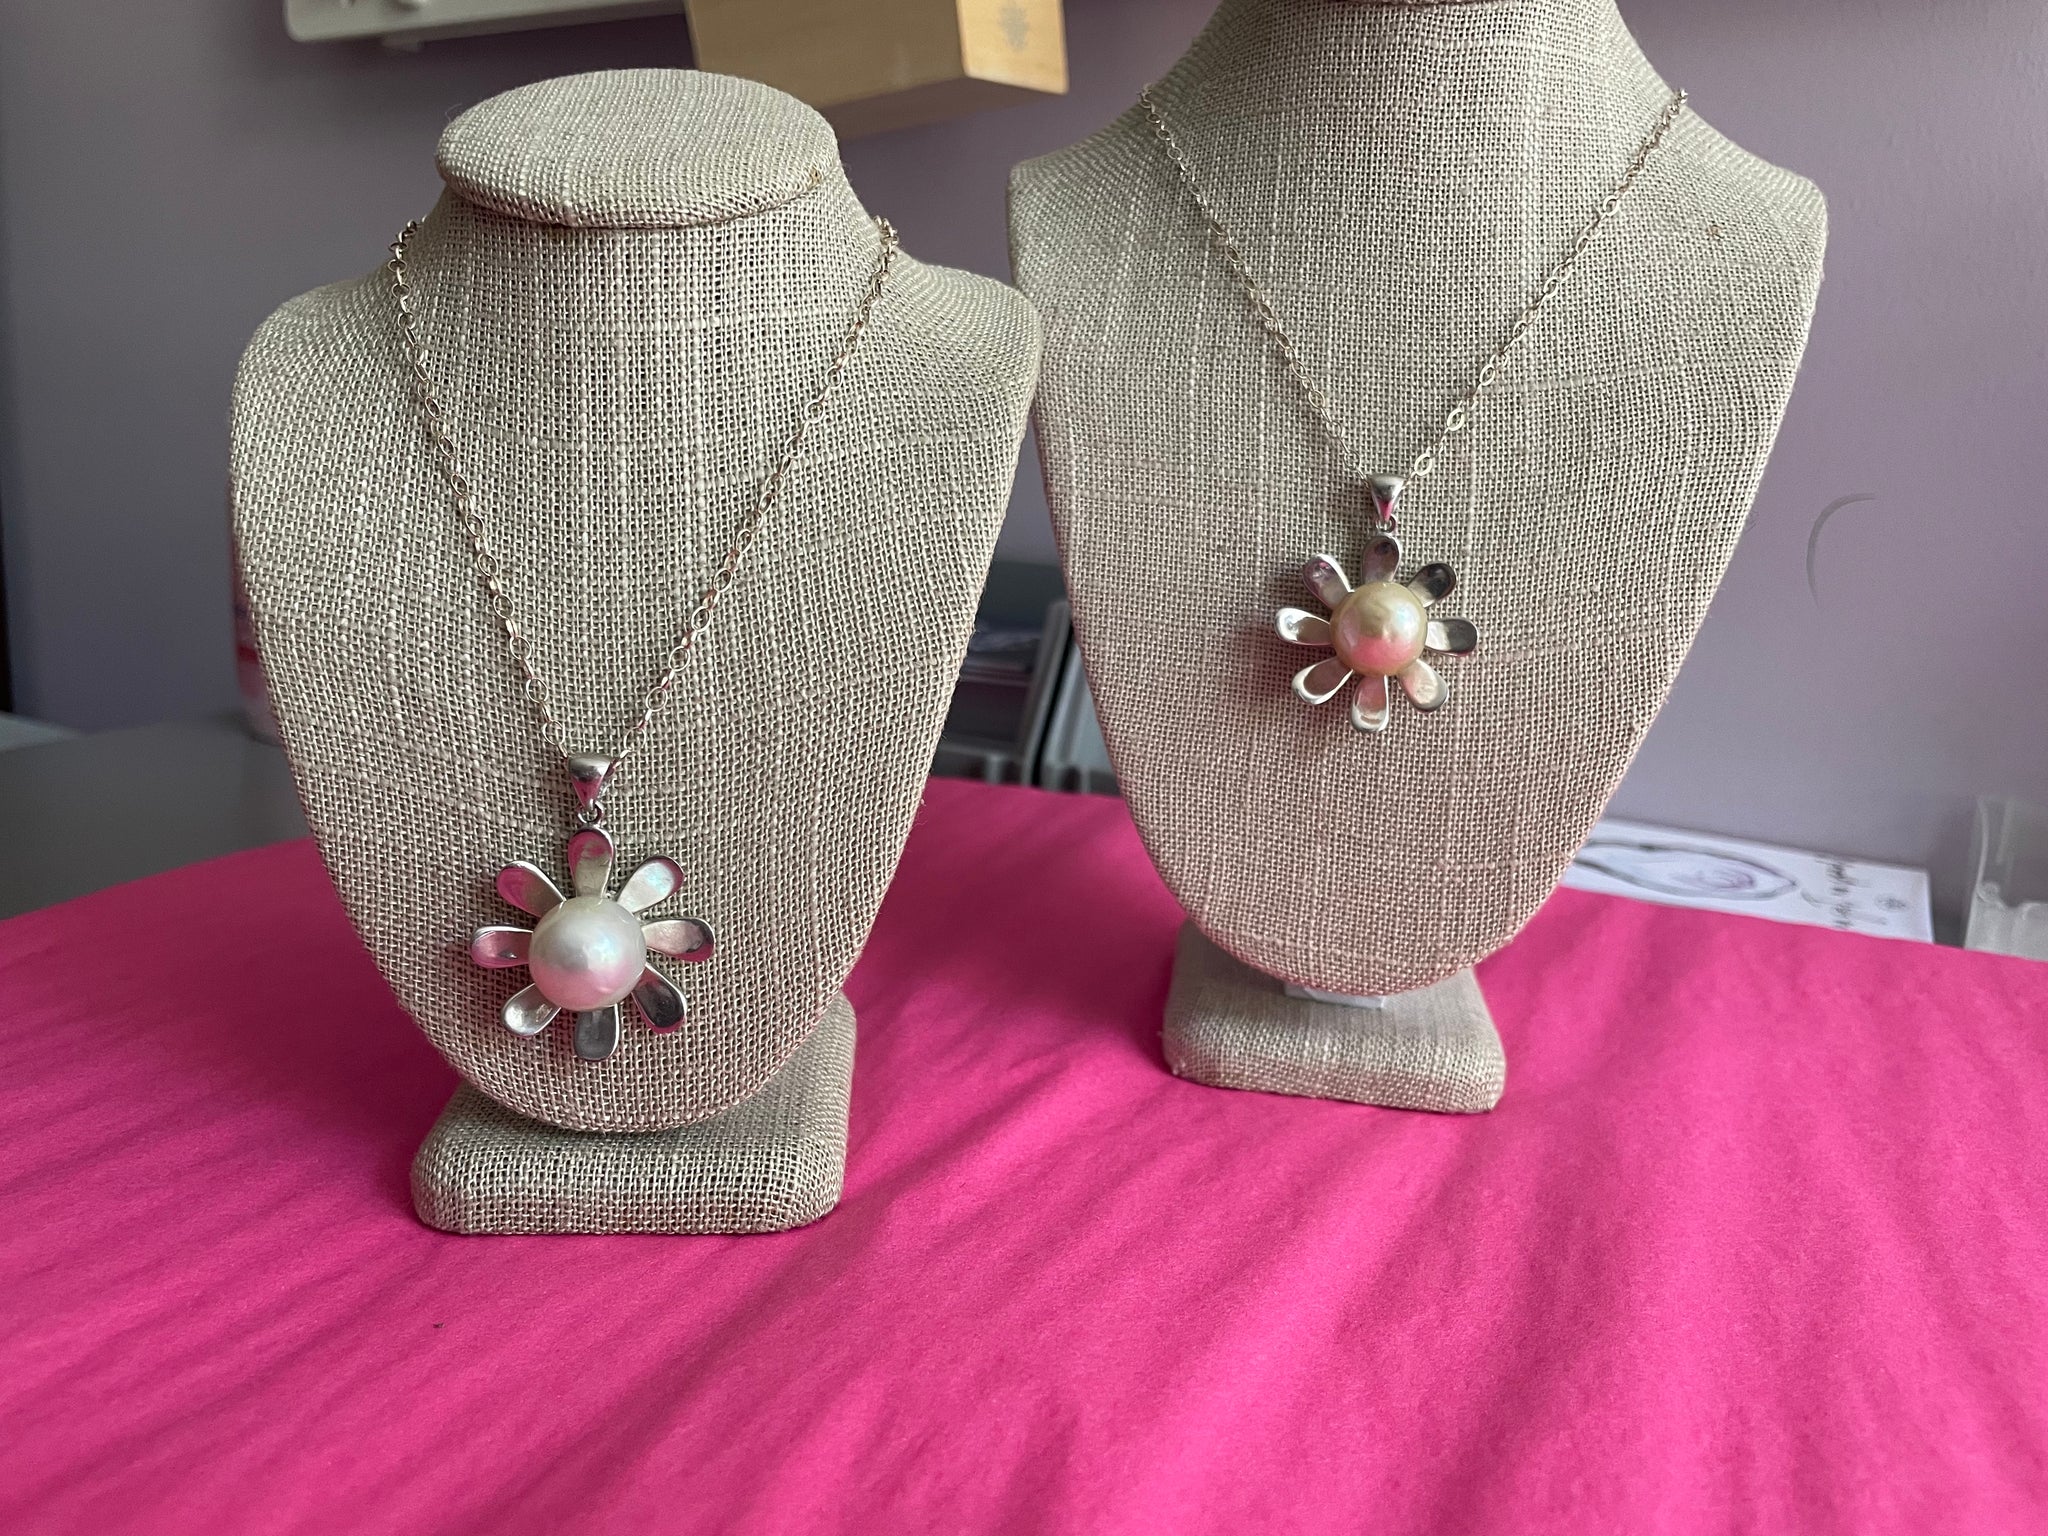 Blooming Necklace, Mix Pearl